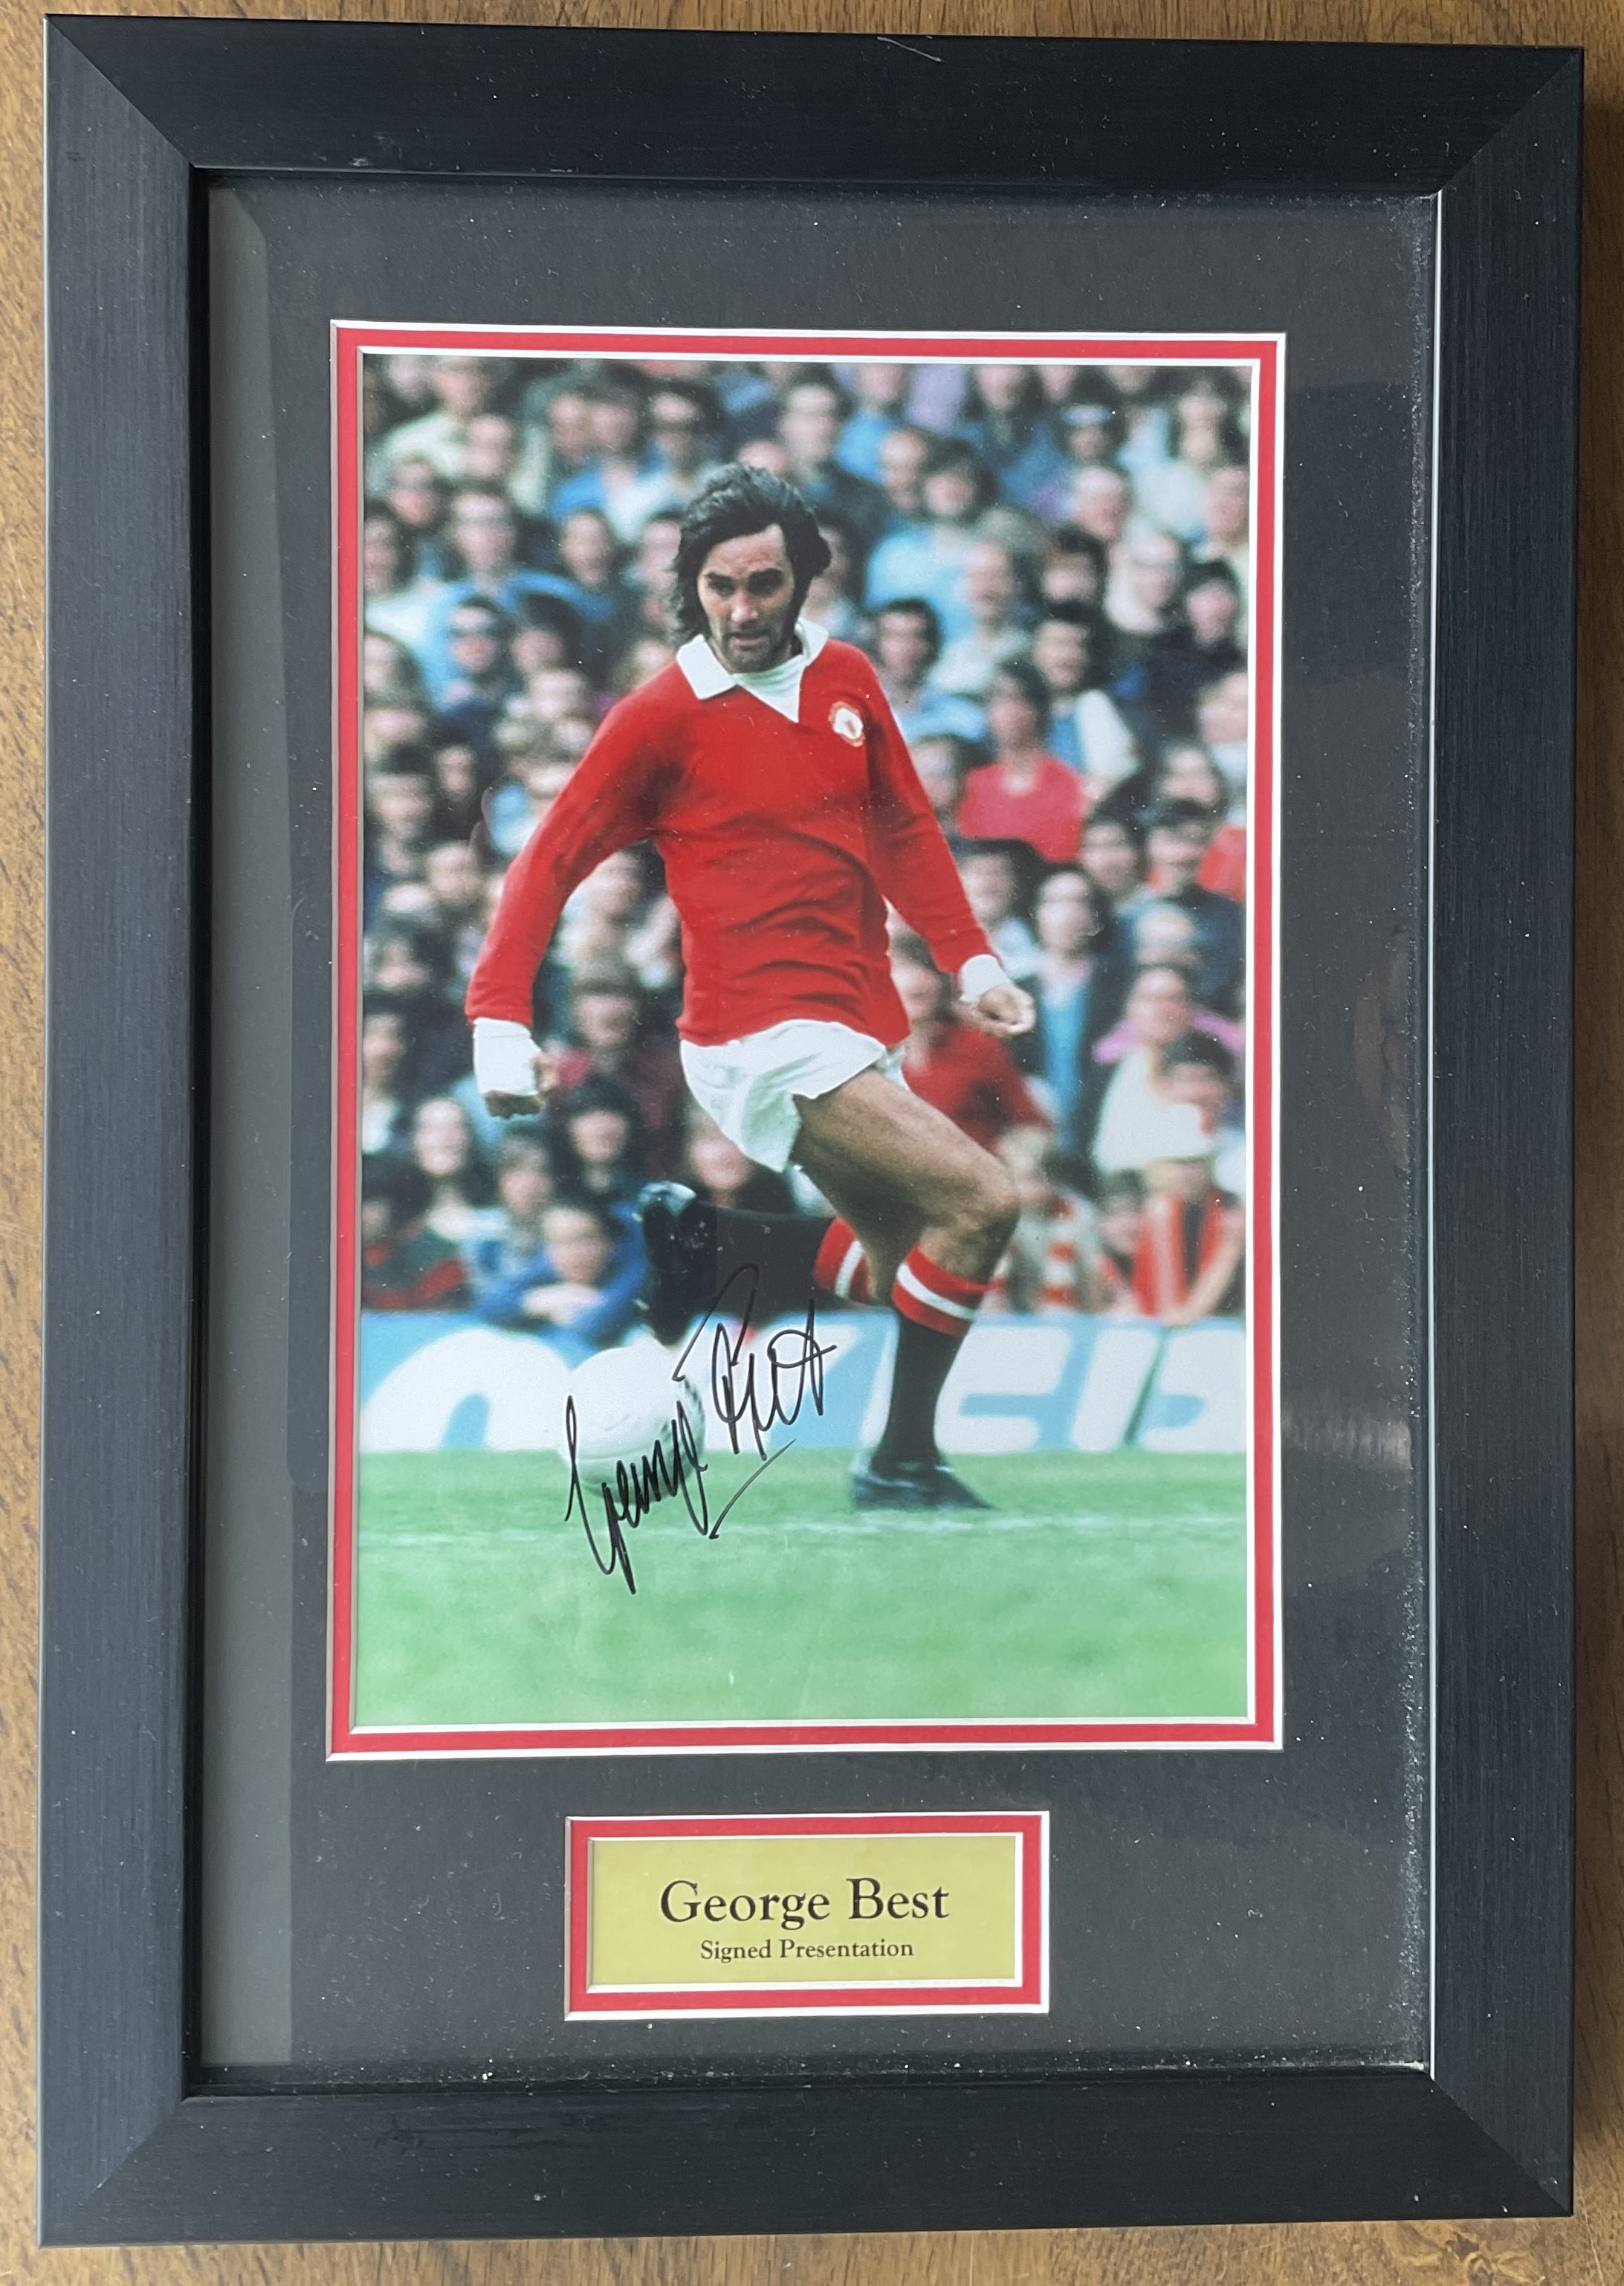 George Best signed 13x18 colour photo in frame. Good condition. All autographs come with a